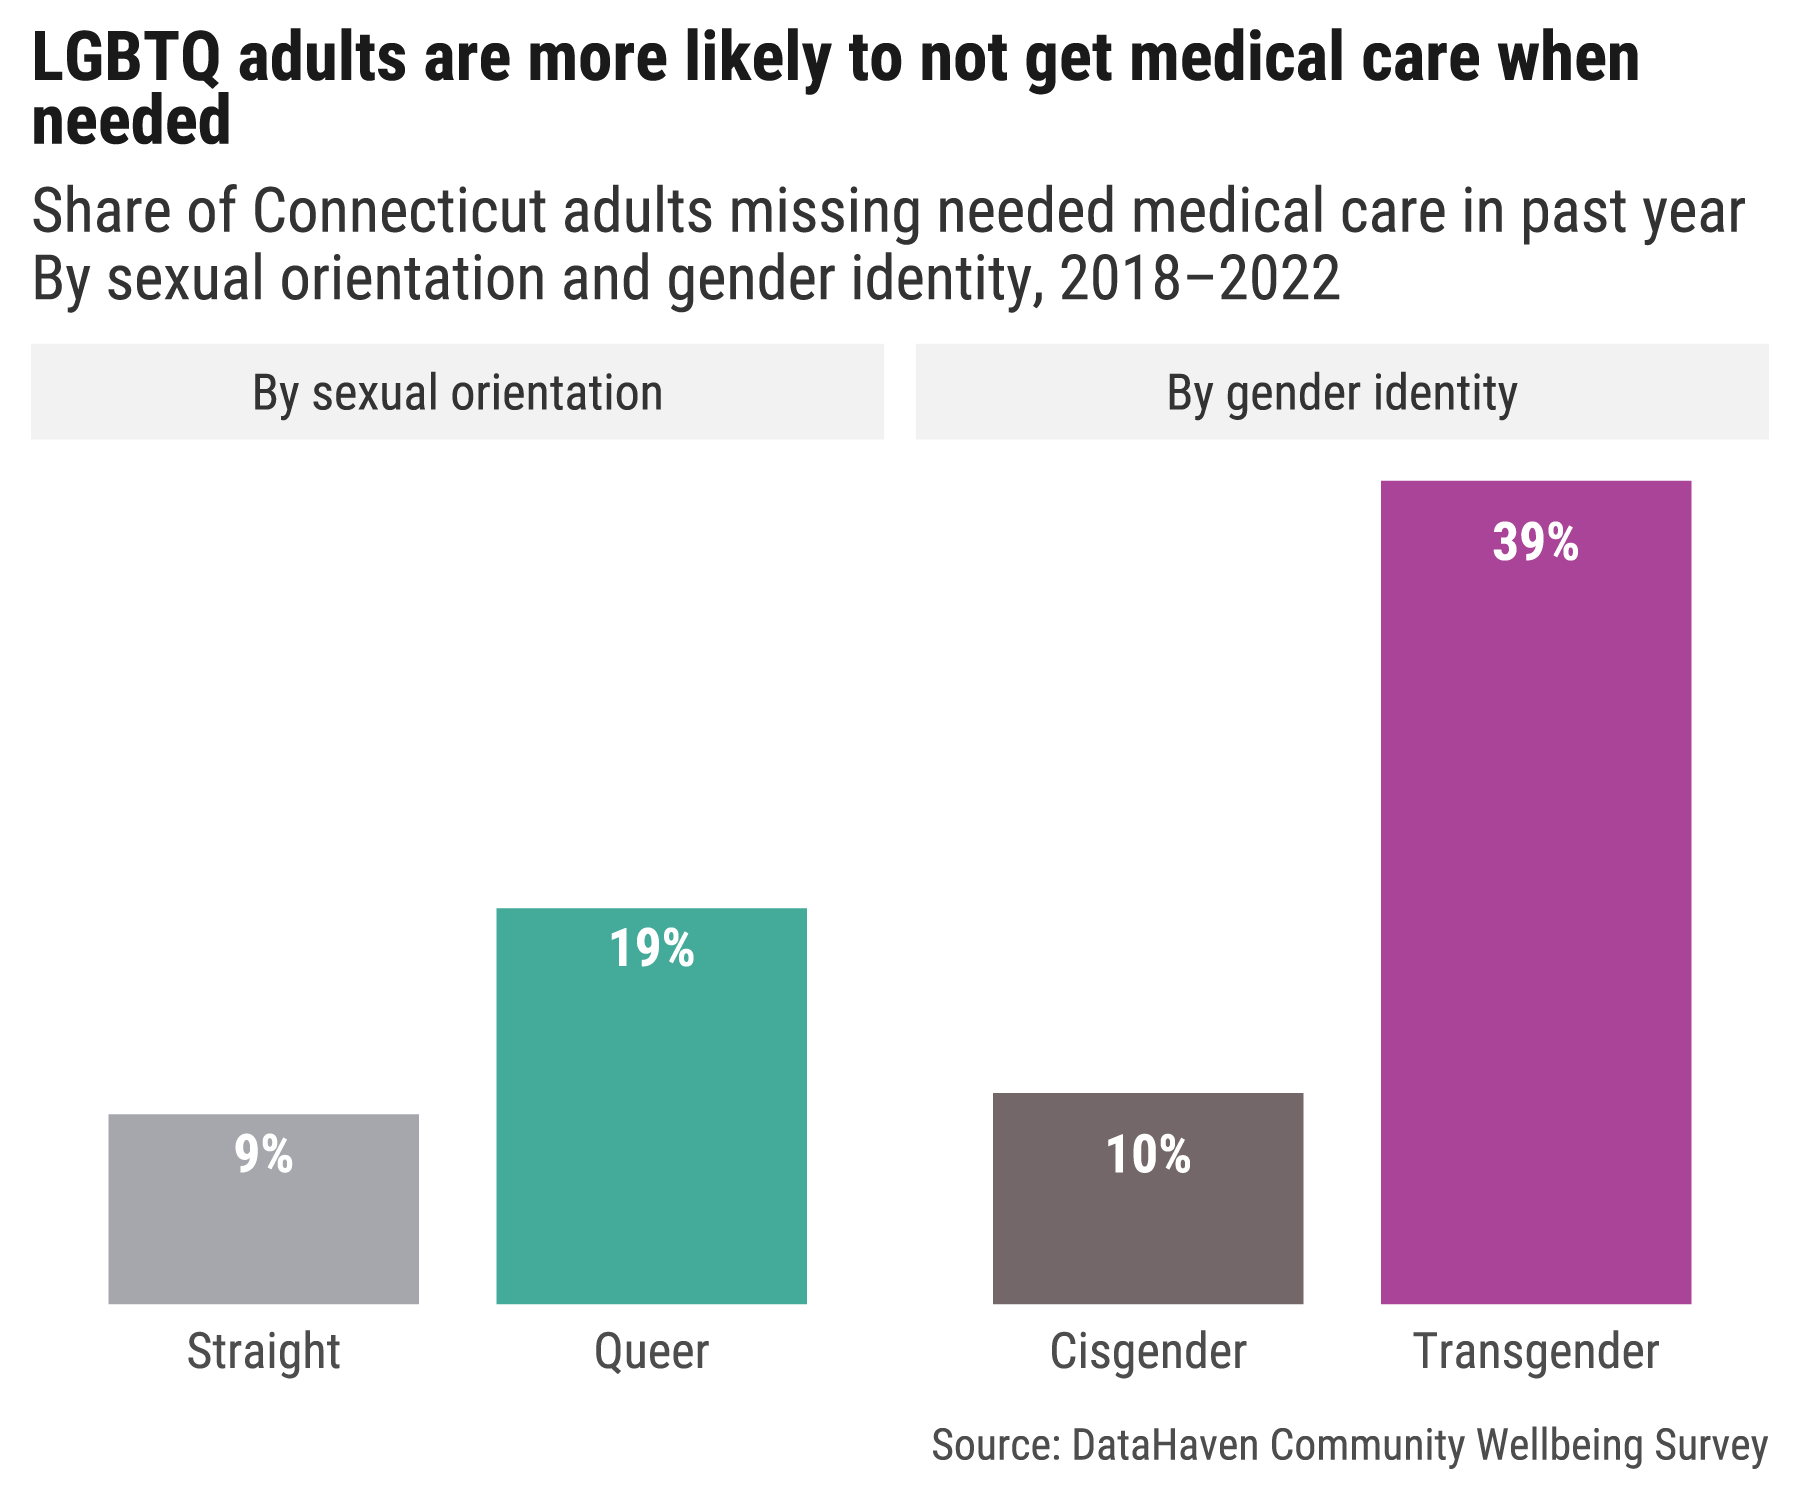 LGBTQ adults are more likely not to get needed medical care